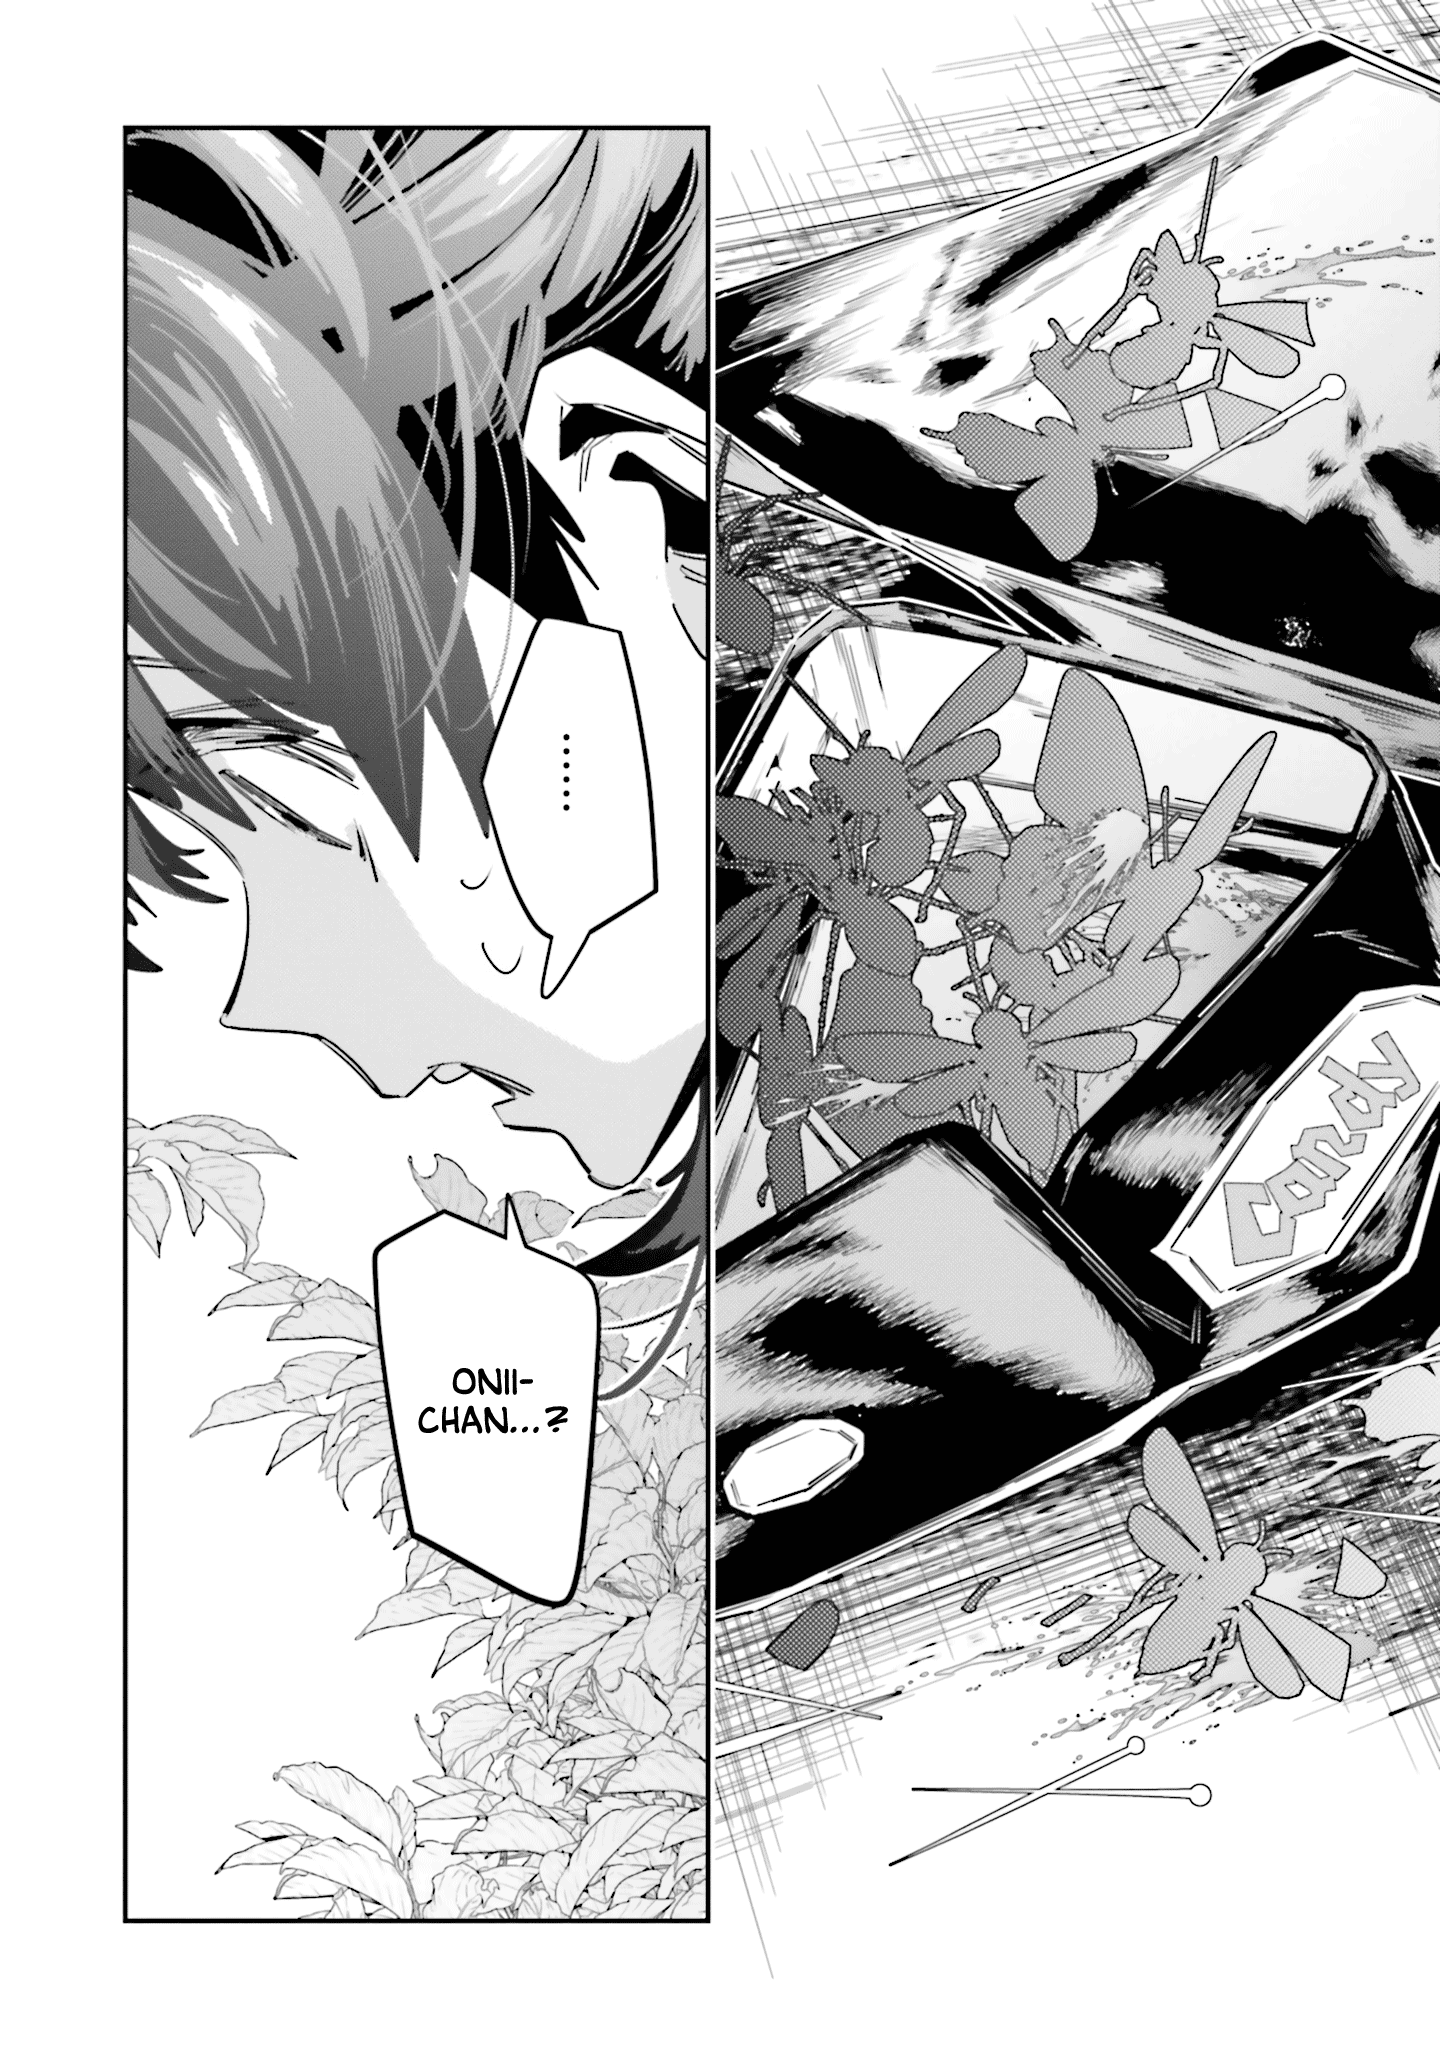 I Reincarnated As The Little Sister Of A Death Game Manga's Murder Mastermind And Failed Chapter 4 #27